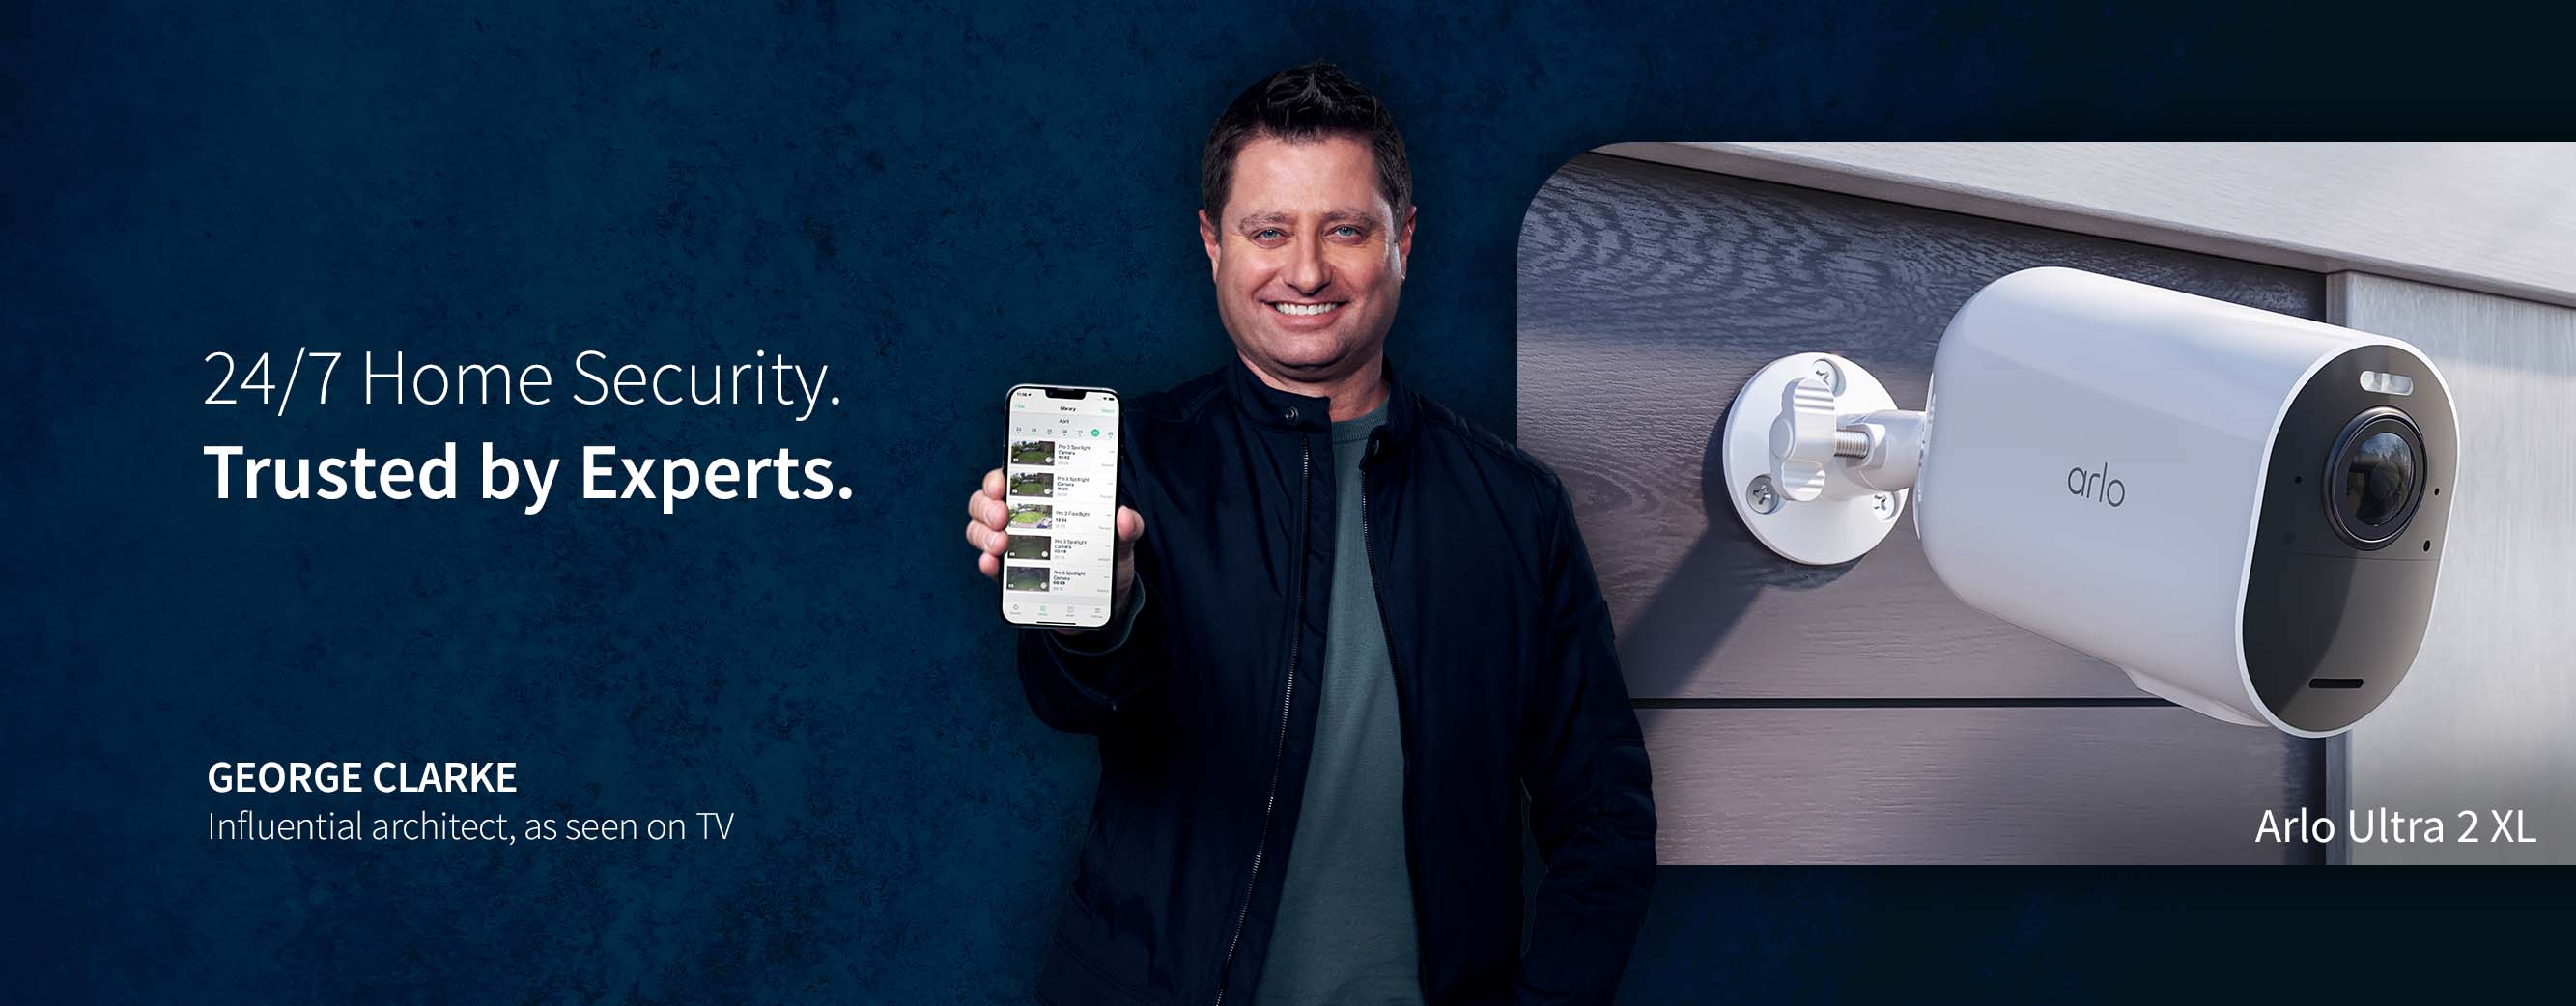 George Clarke, Influential architect on TV, presents the Arlo Ultra 2 XL Security Camera and the Arlo App